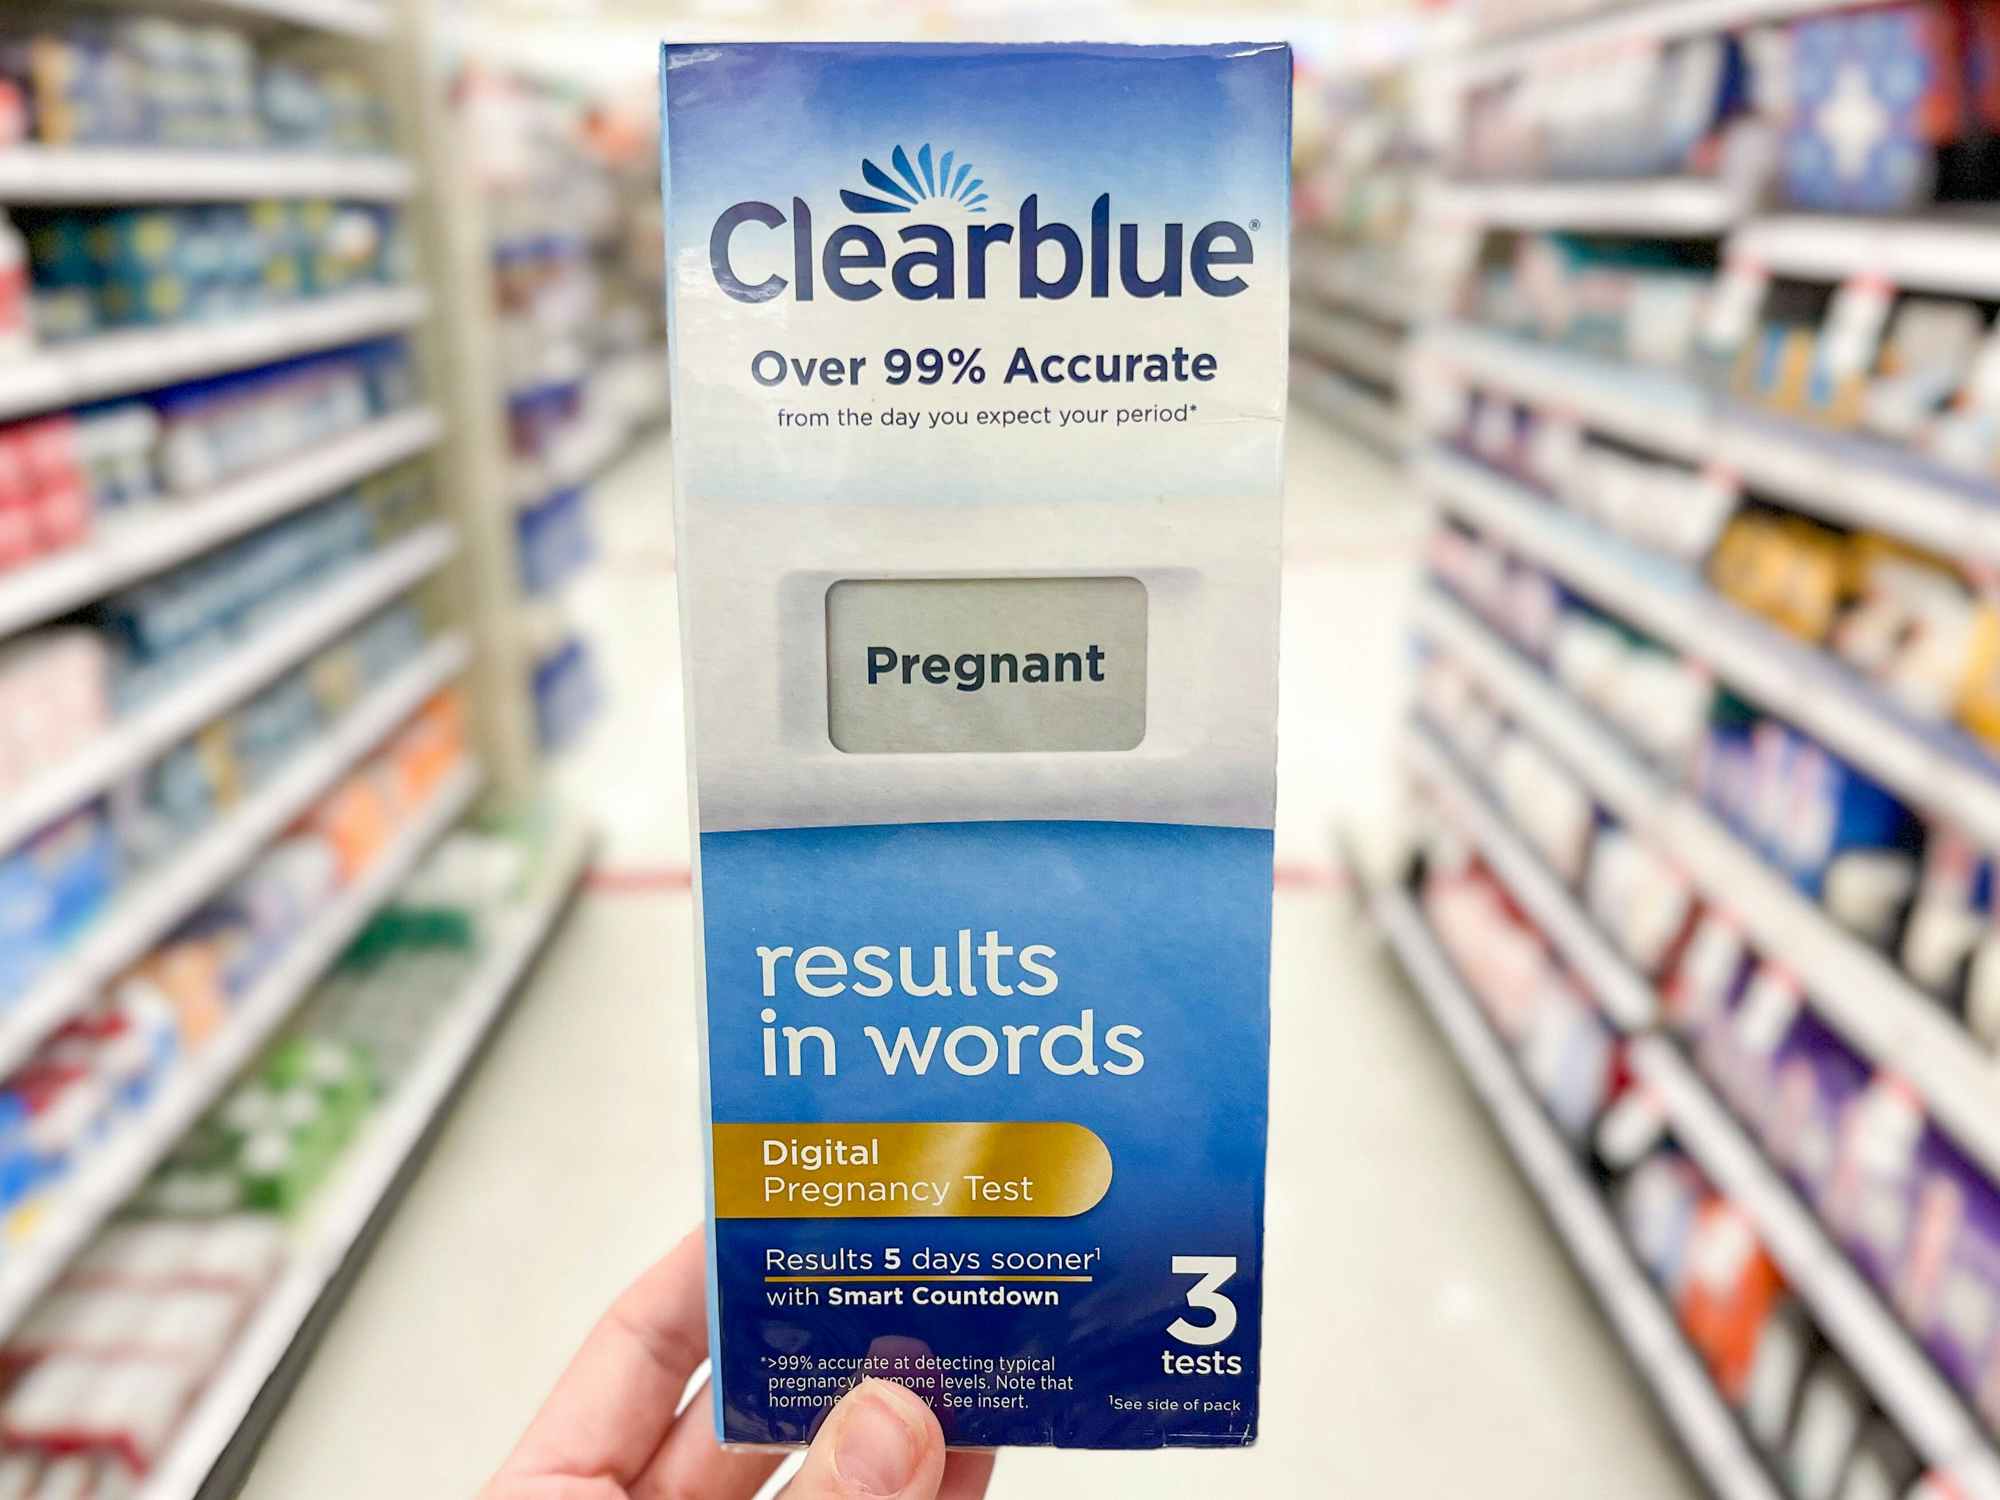 Someone holding a box of Clearblue pregnancy tests in a store